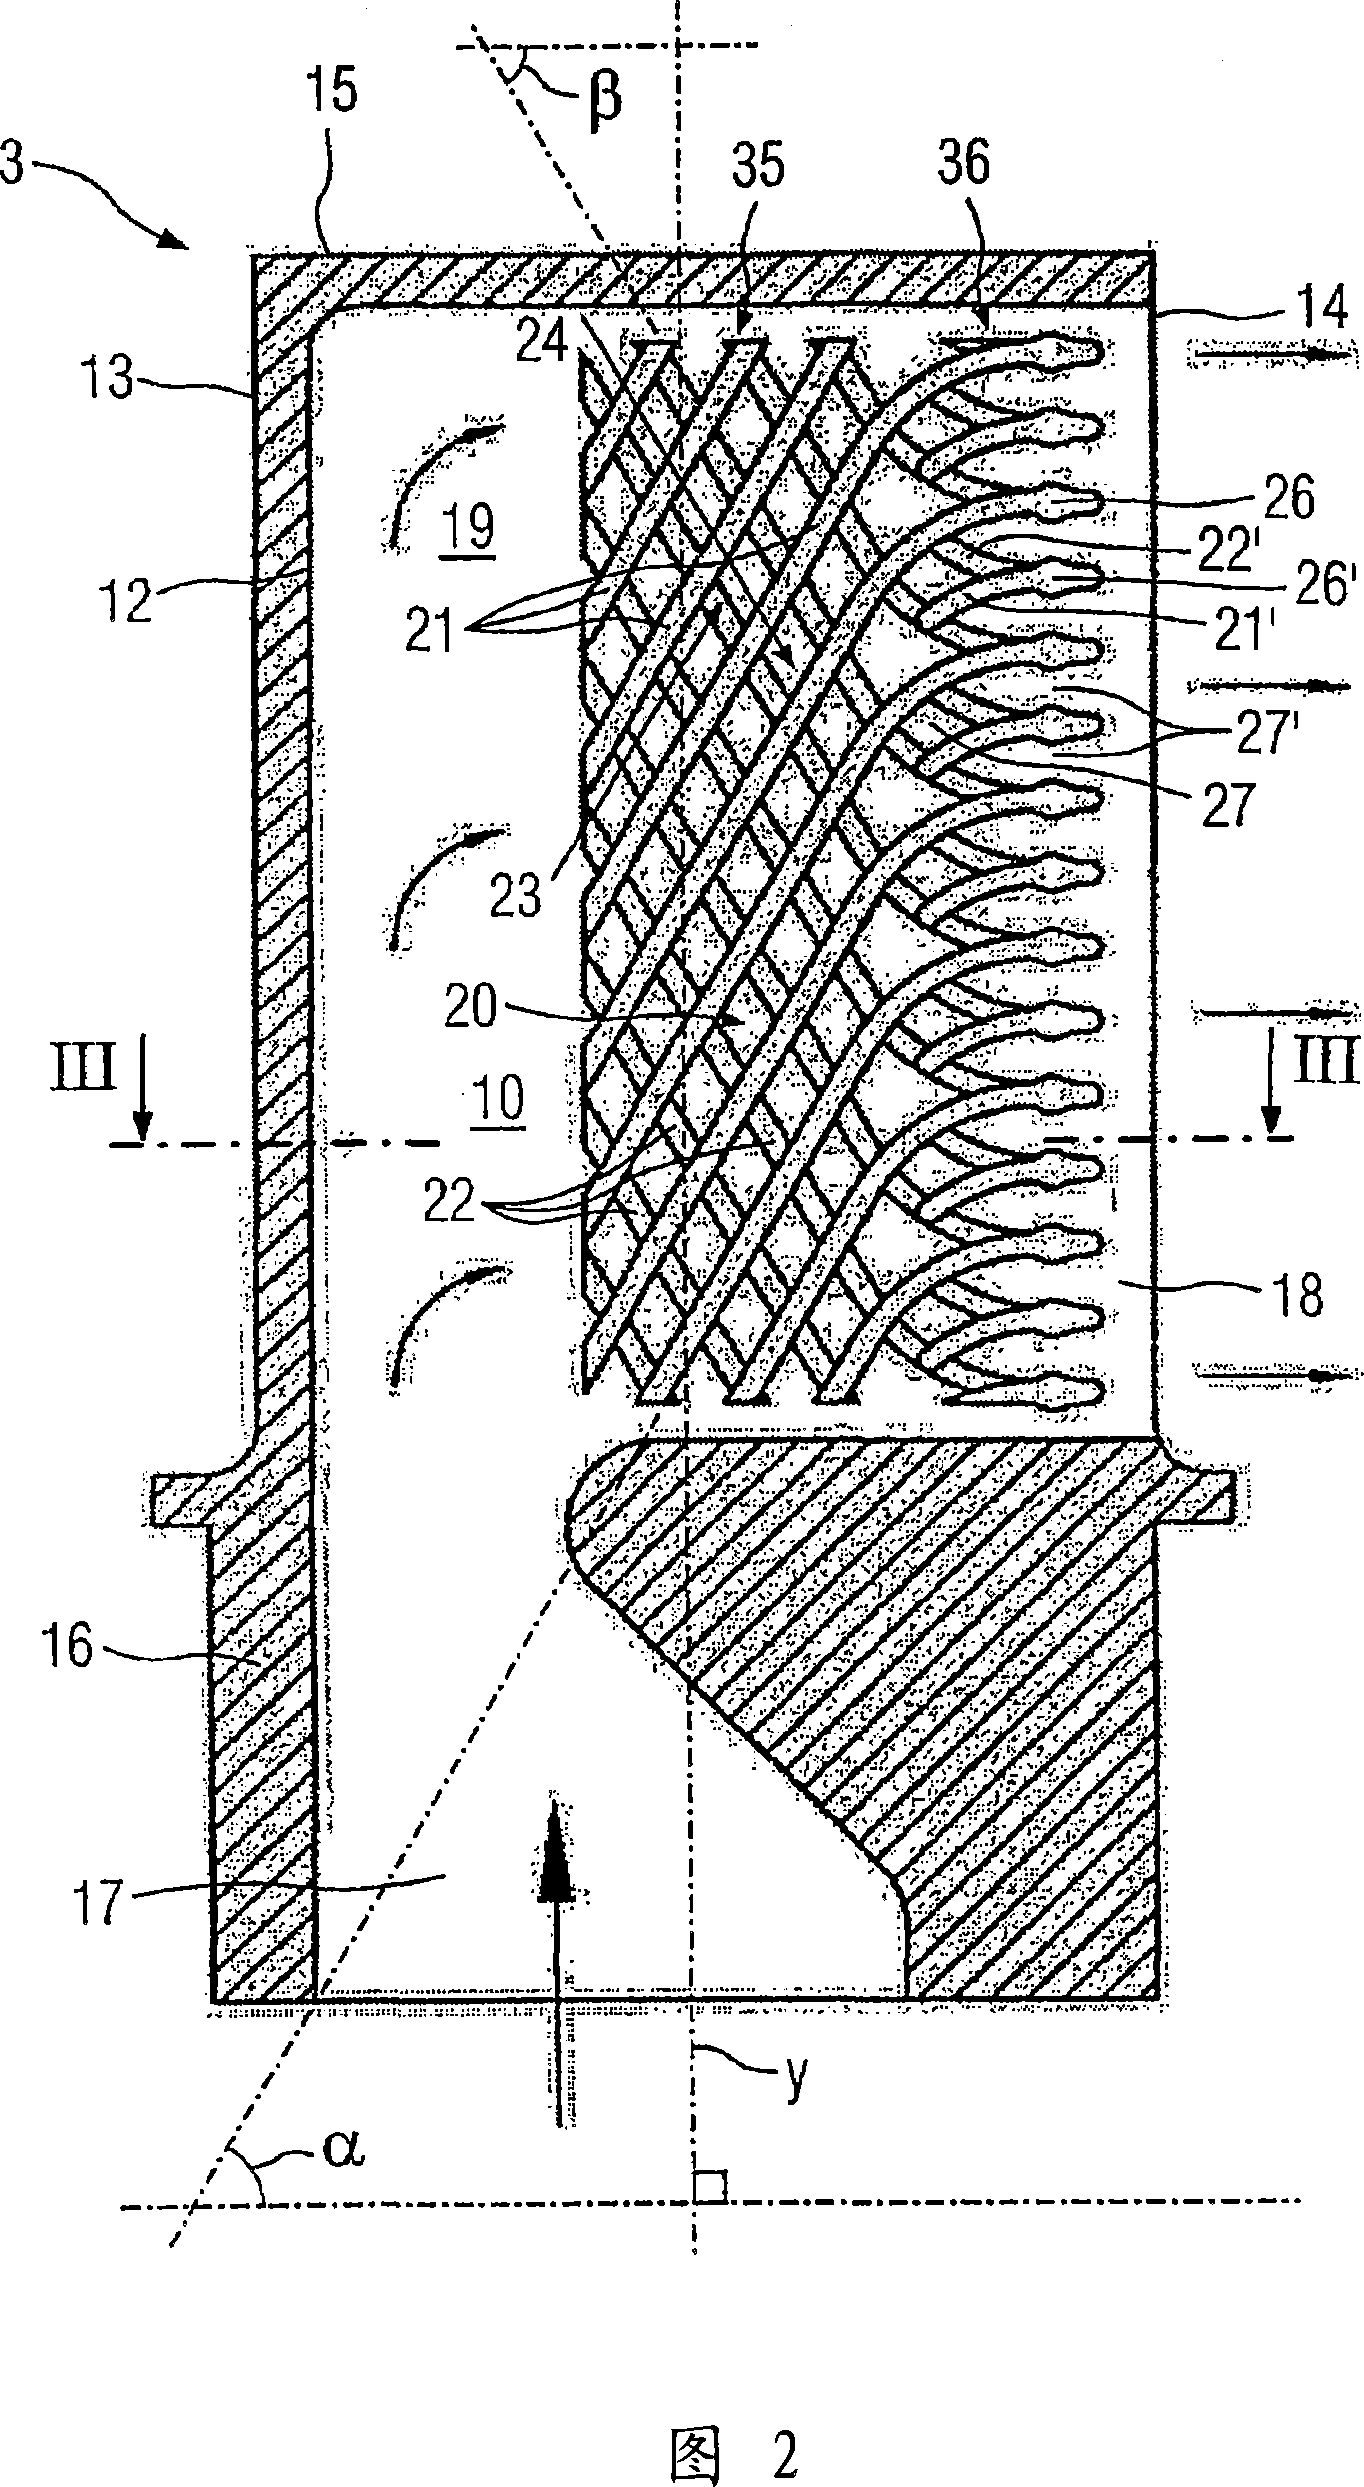 Blade or vane for a rotary machine